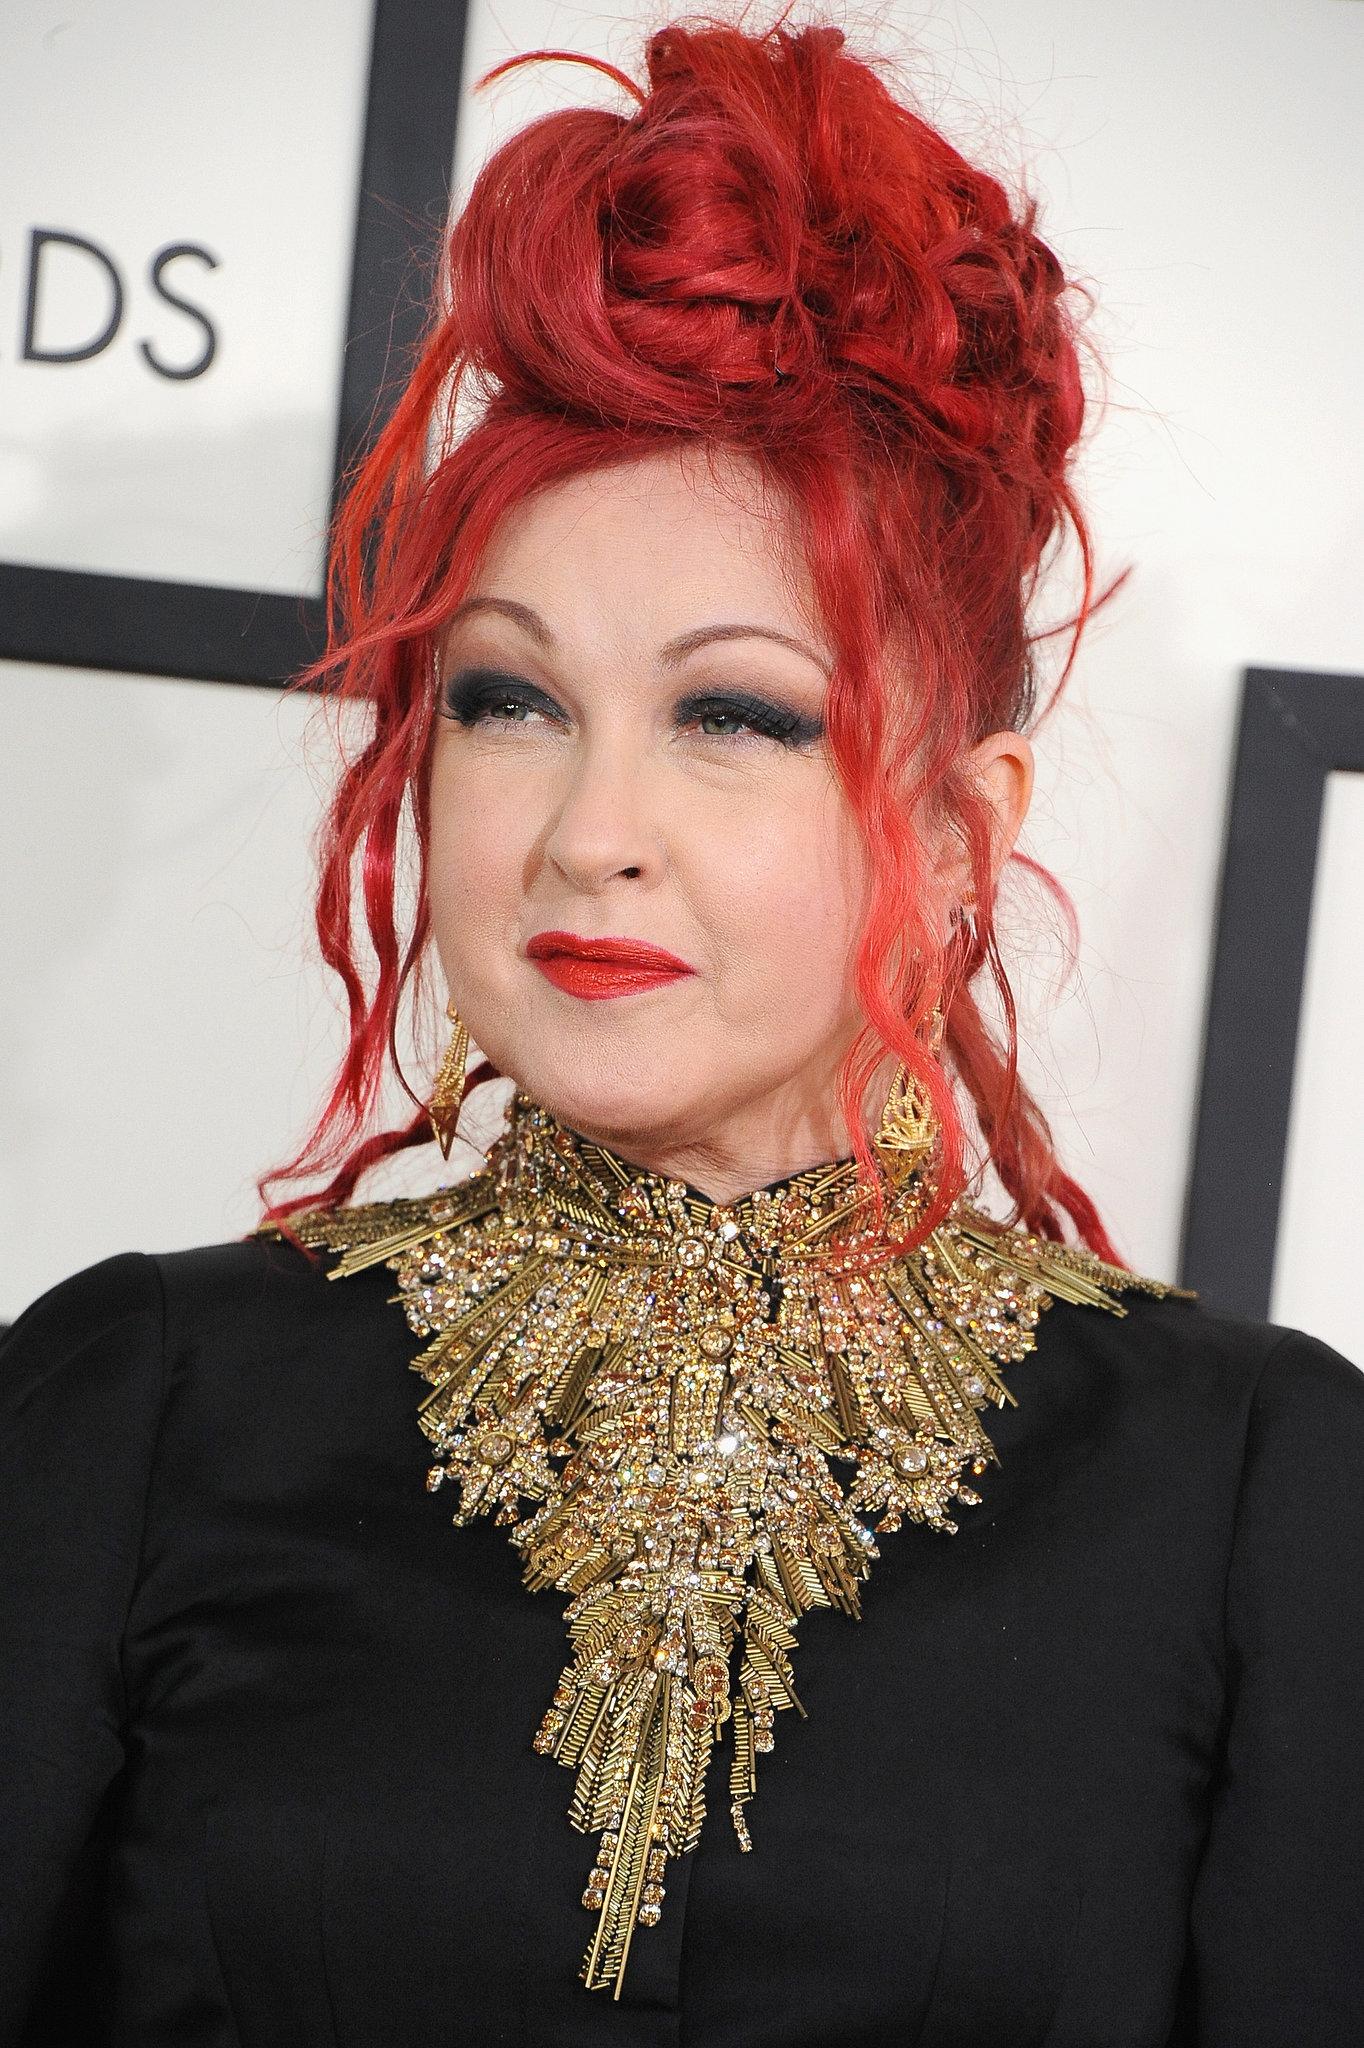 Pictures of Cyndi Lauper.